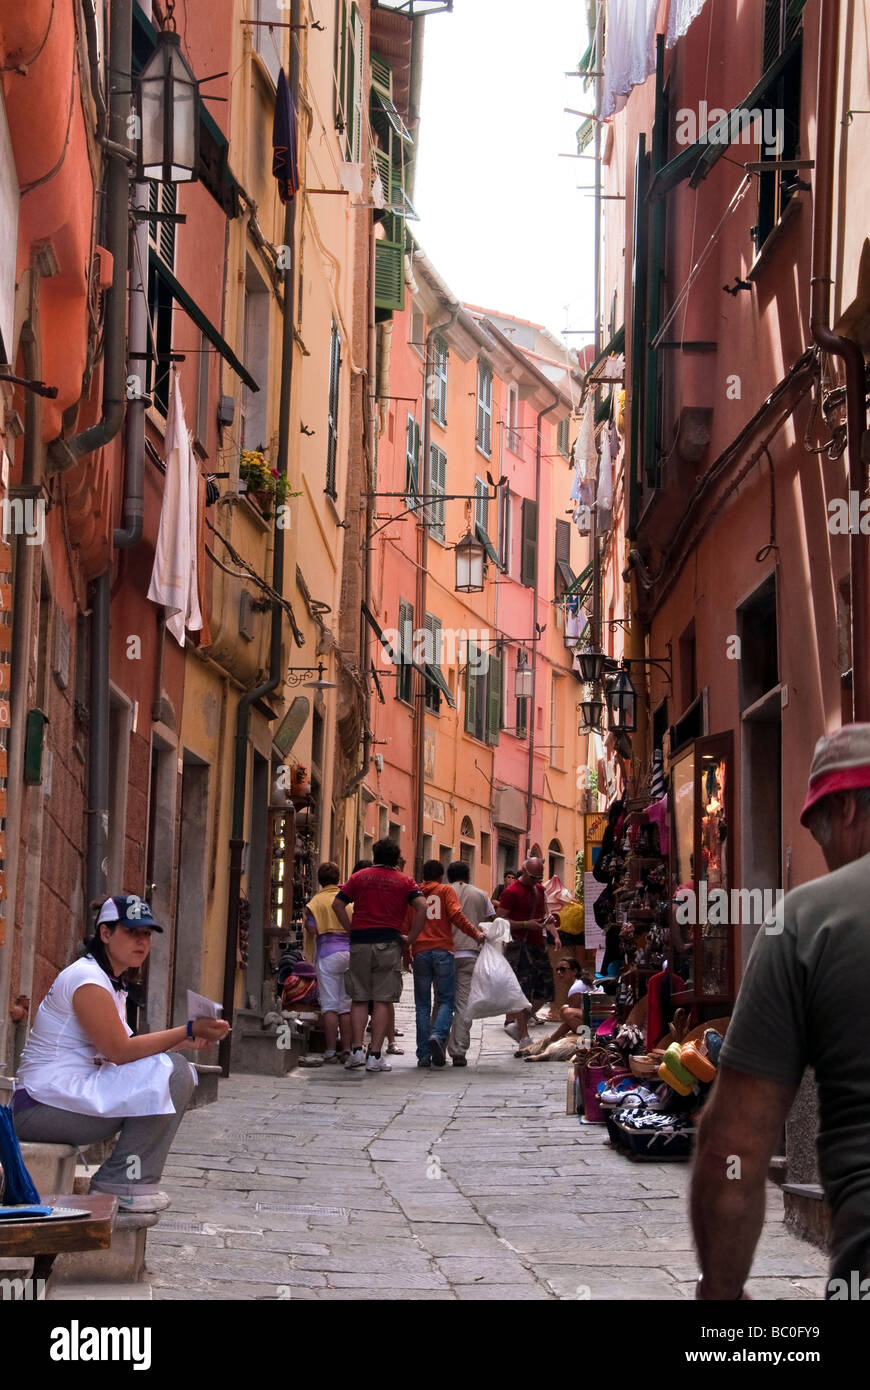 tourists walking along the narrow back streets of Portovenere with flower pots and washing hanging Stock Photo